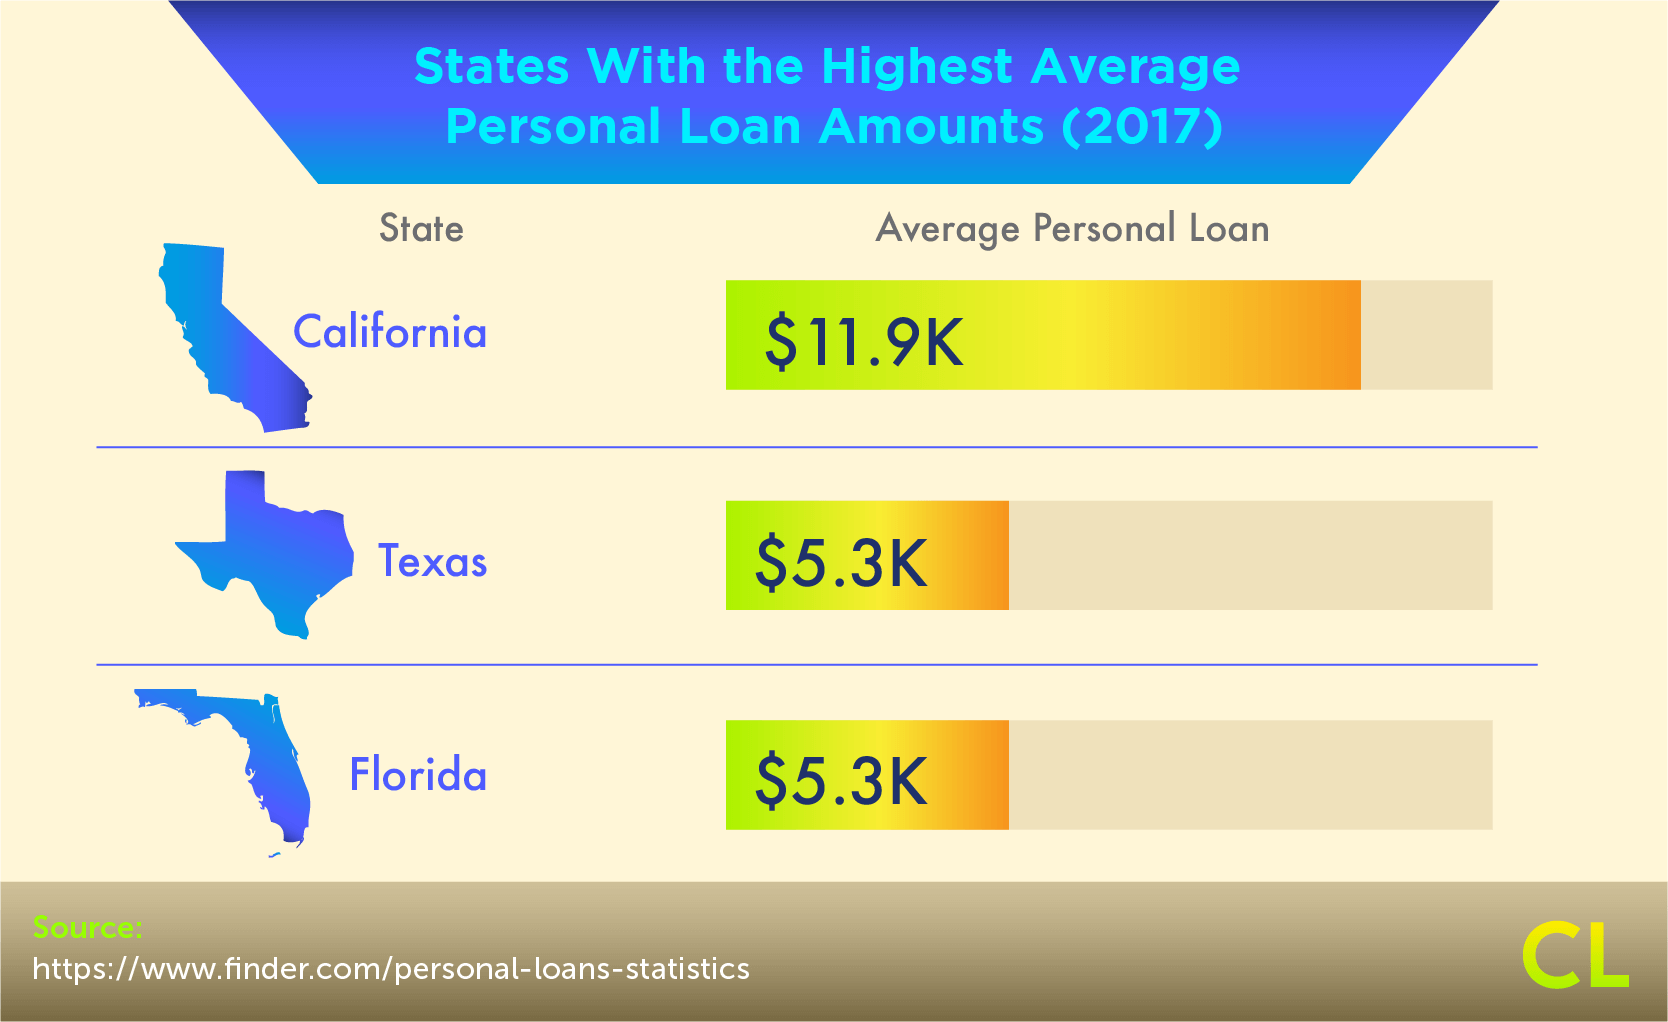 States With the Highest Average Personal Loan Amounts